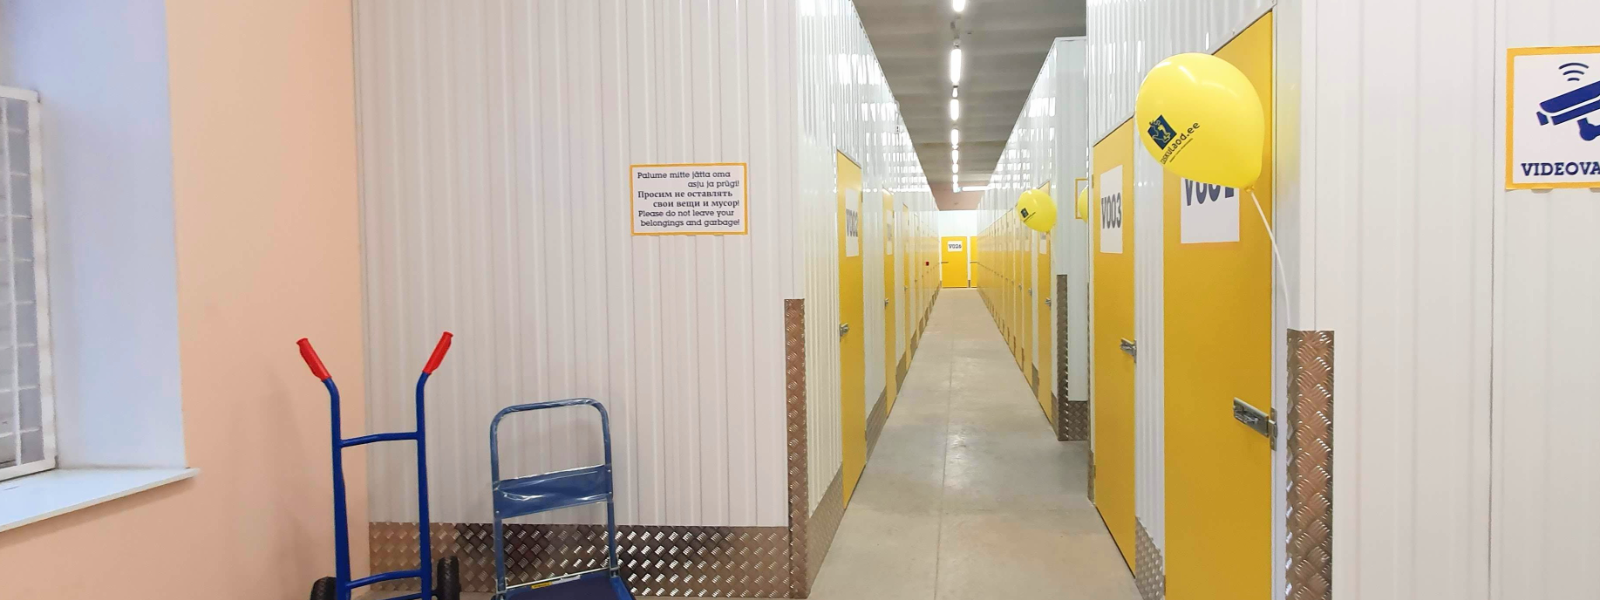 TASKULAOD OÜ - We offer rental of storage rooms, warehouse services, and mini warehouses with 24/7 access.